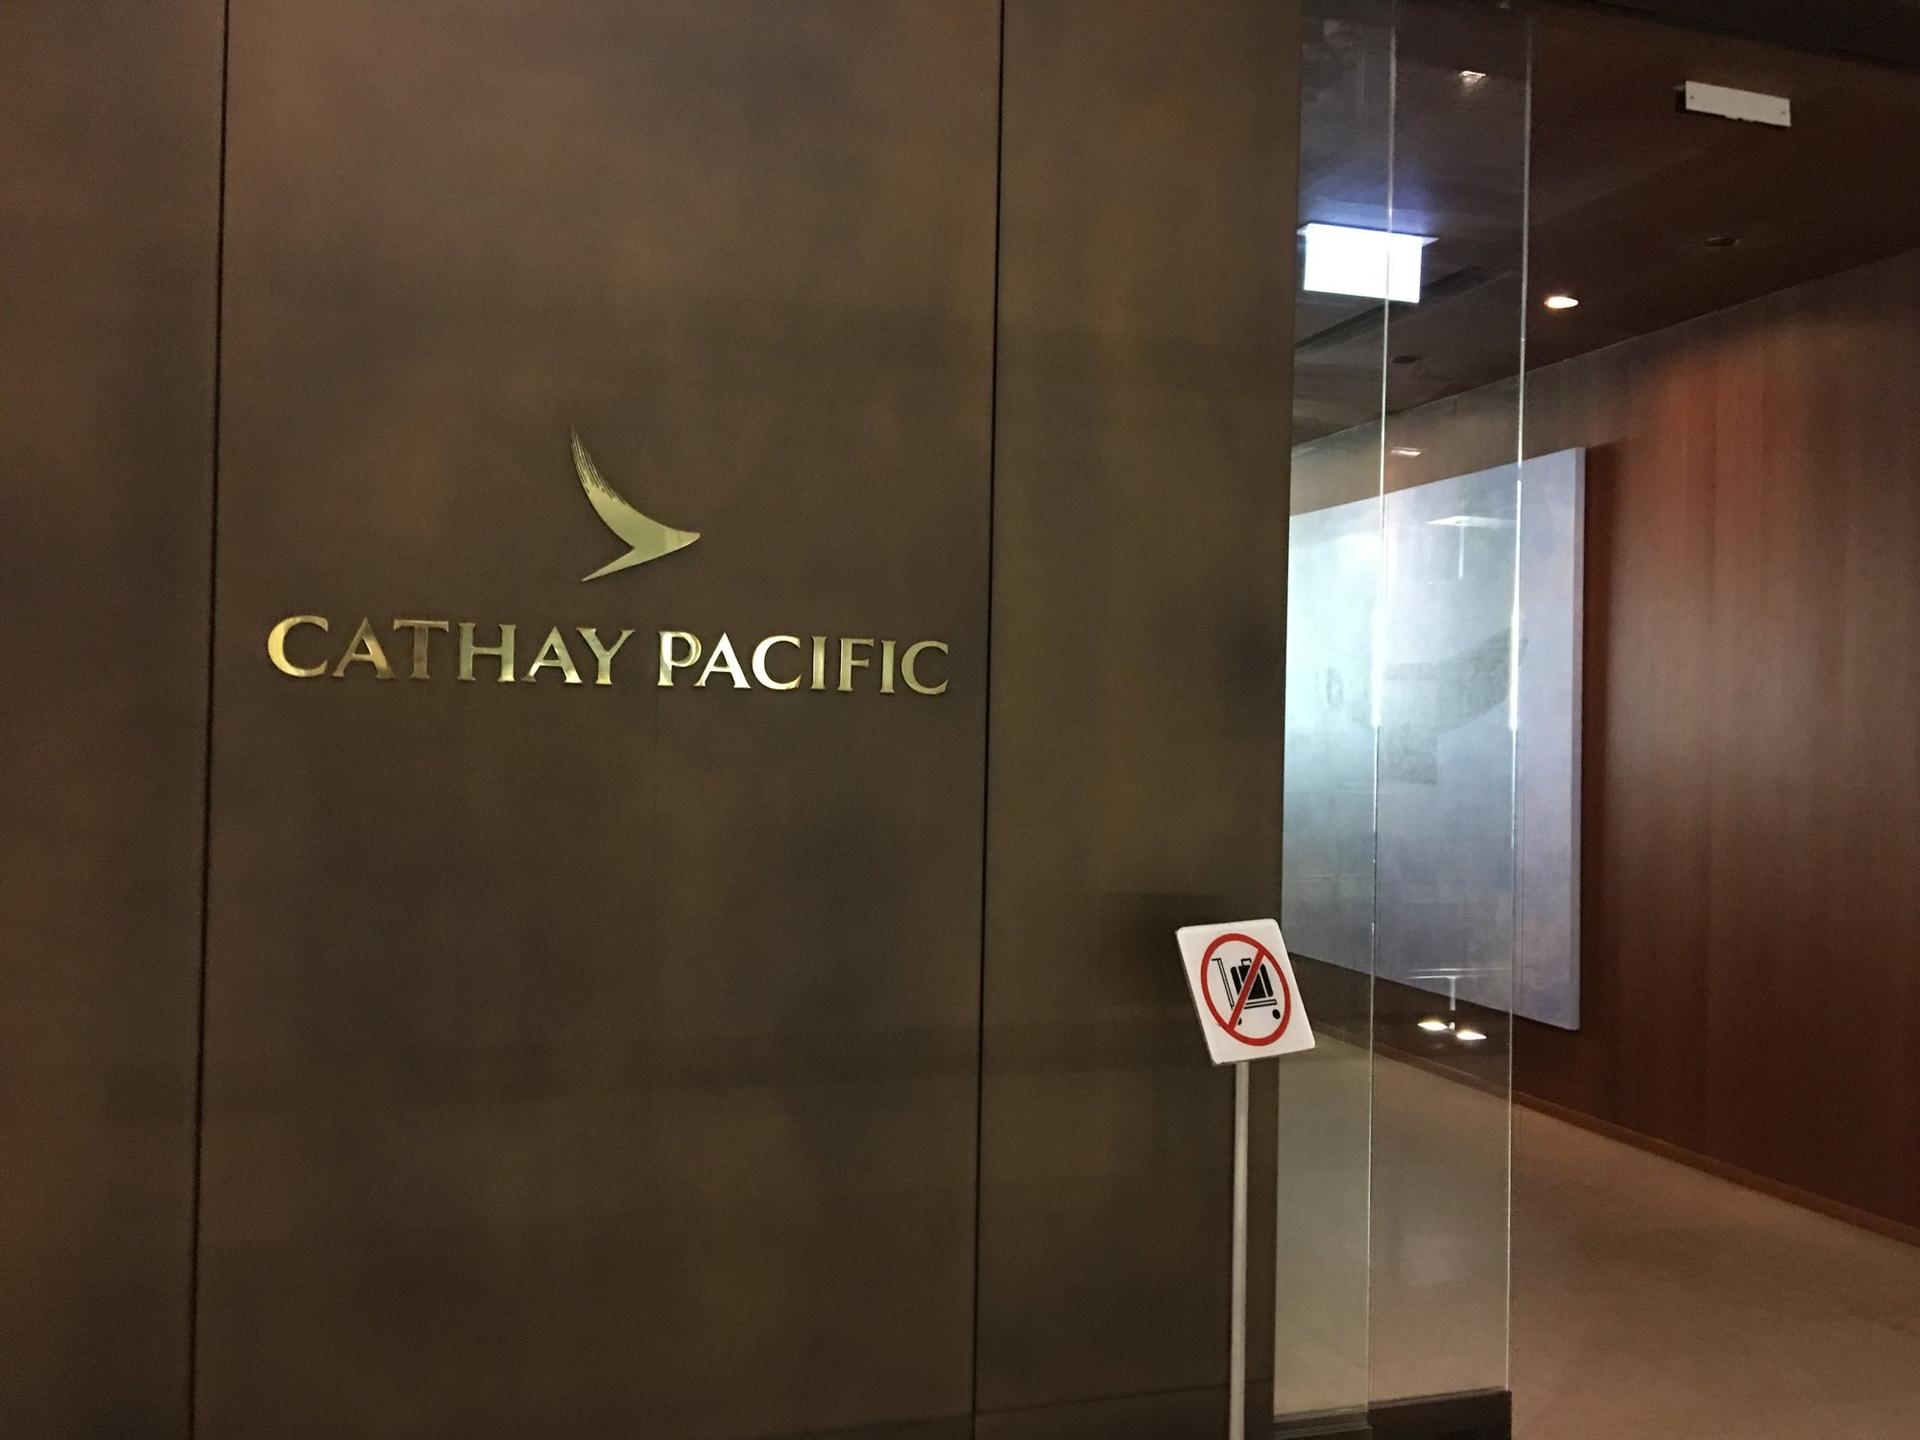 Cathay Pacific First and Business Class Lounge image 58 of 69